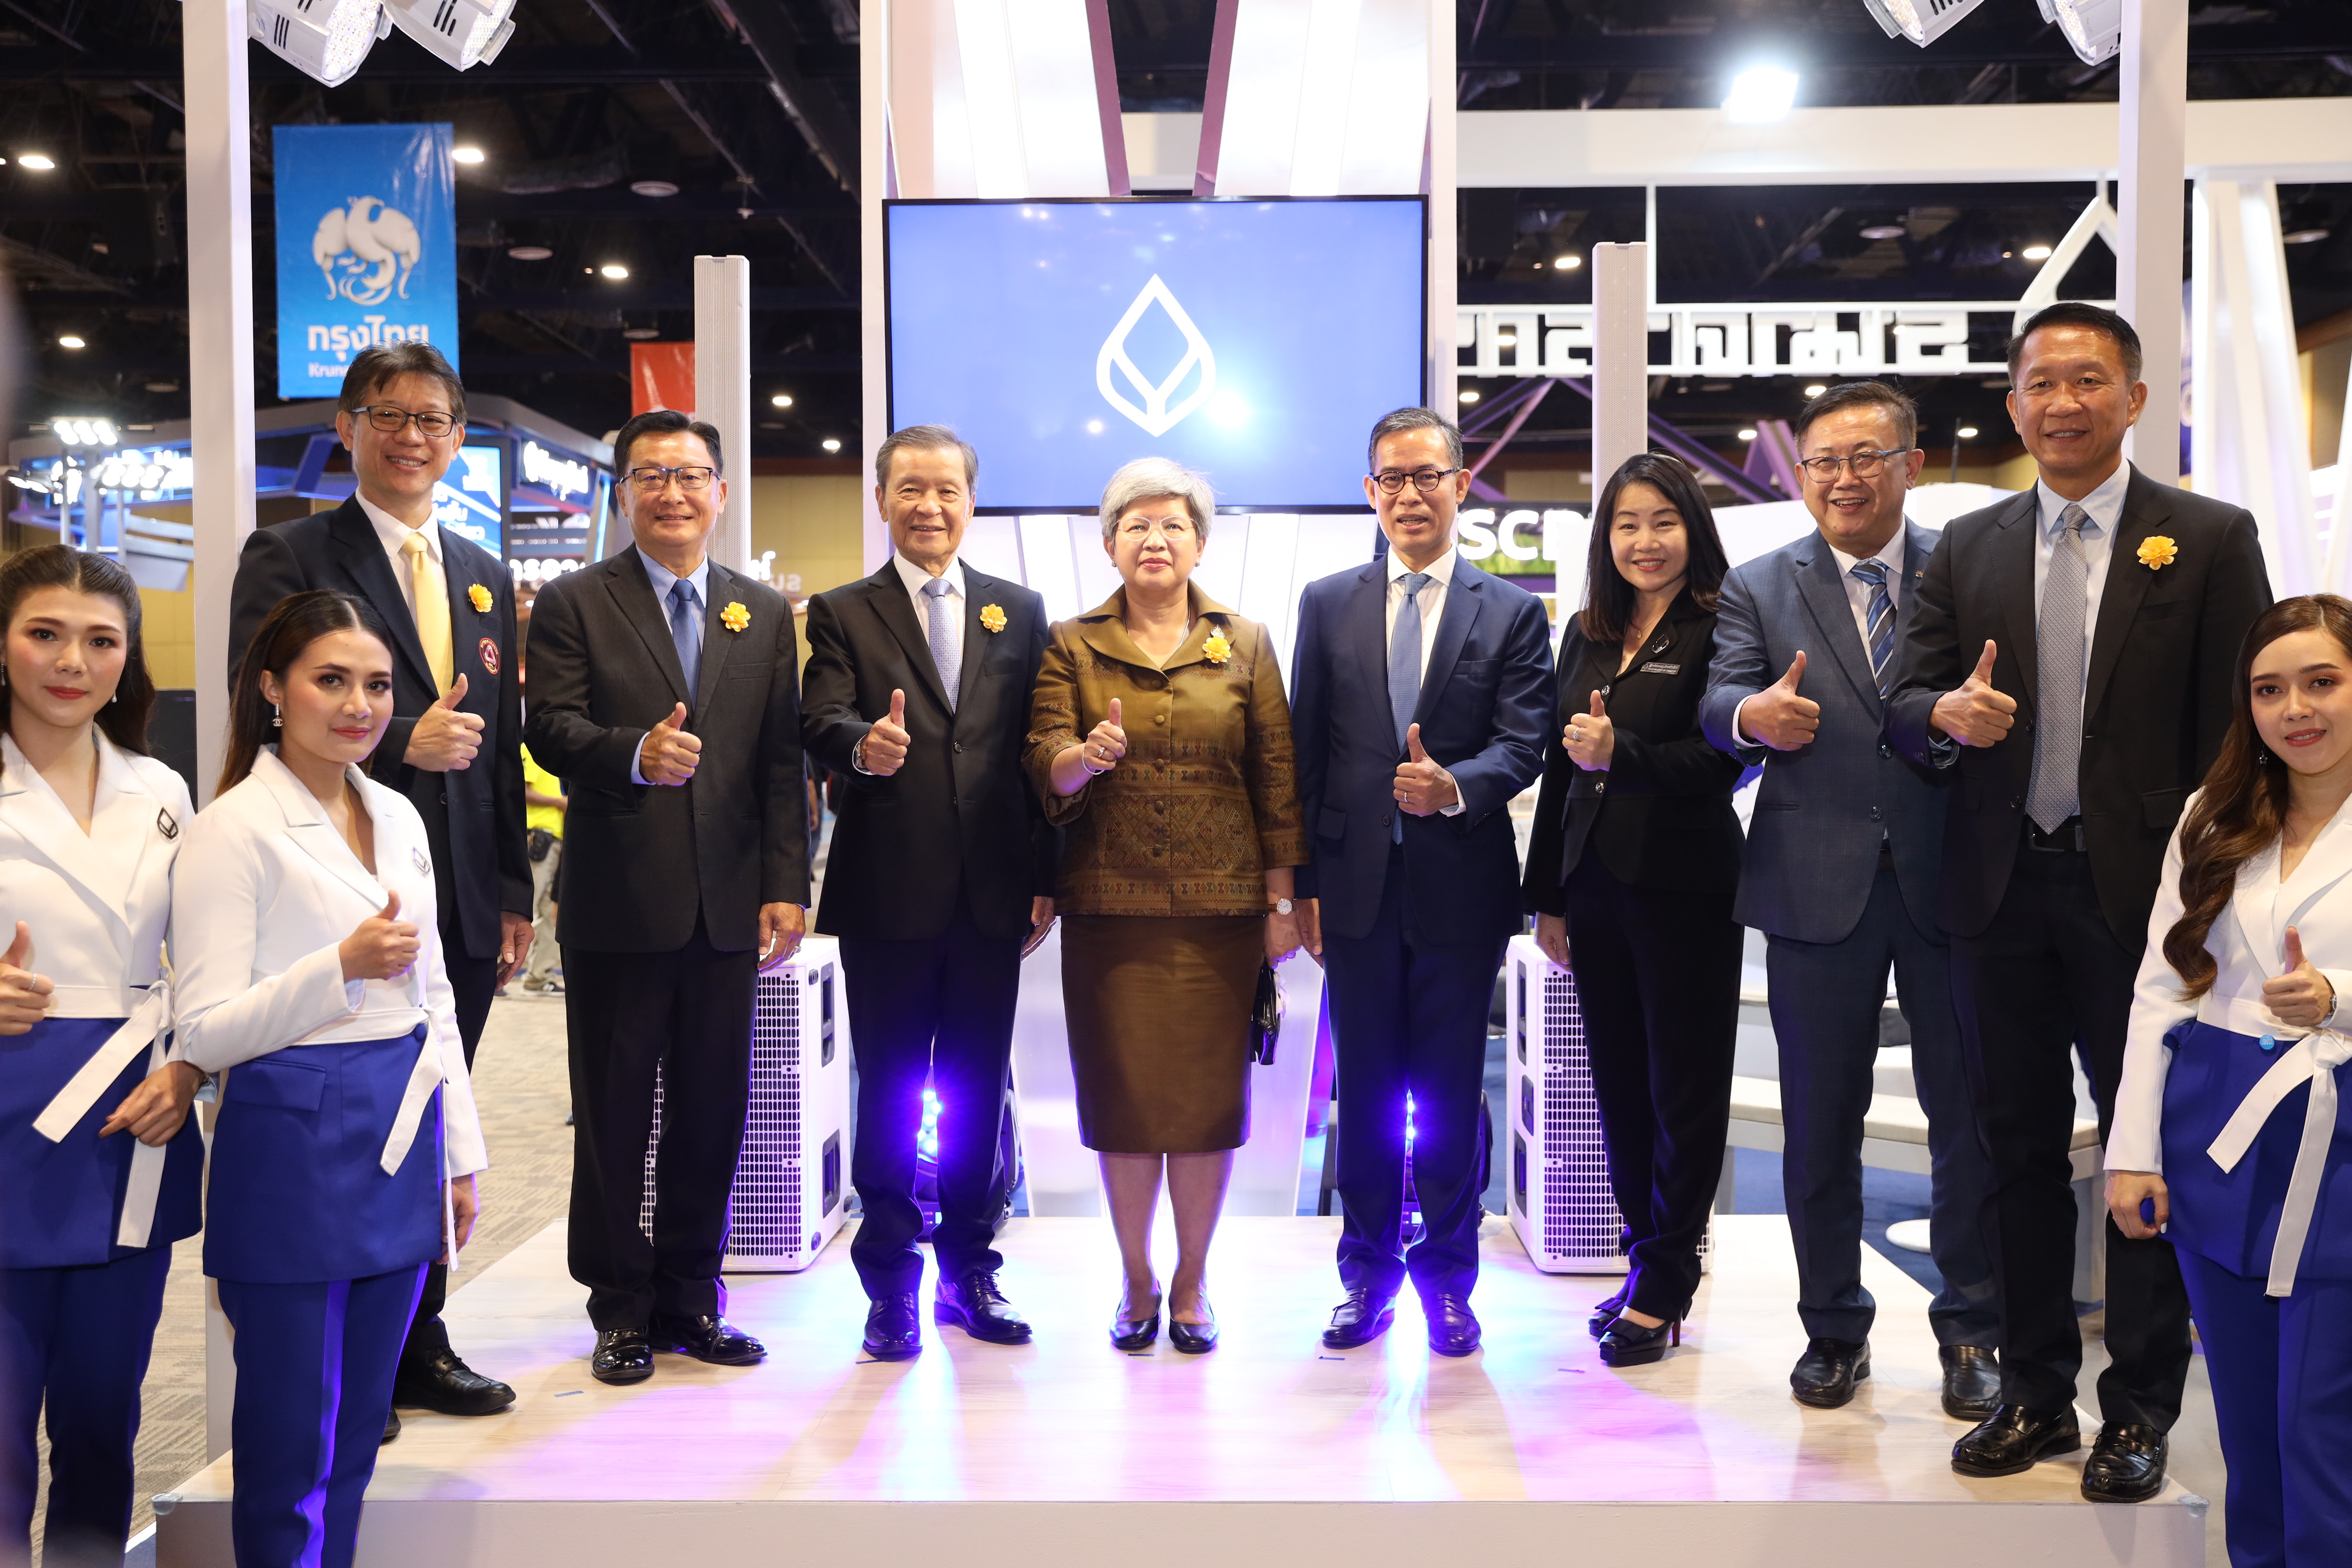 Bangkok Bank joins 'Money Expo Udonthani 2020 to offer financial experiences in the New Normal era to help customers get through the crisis